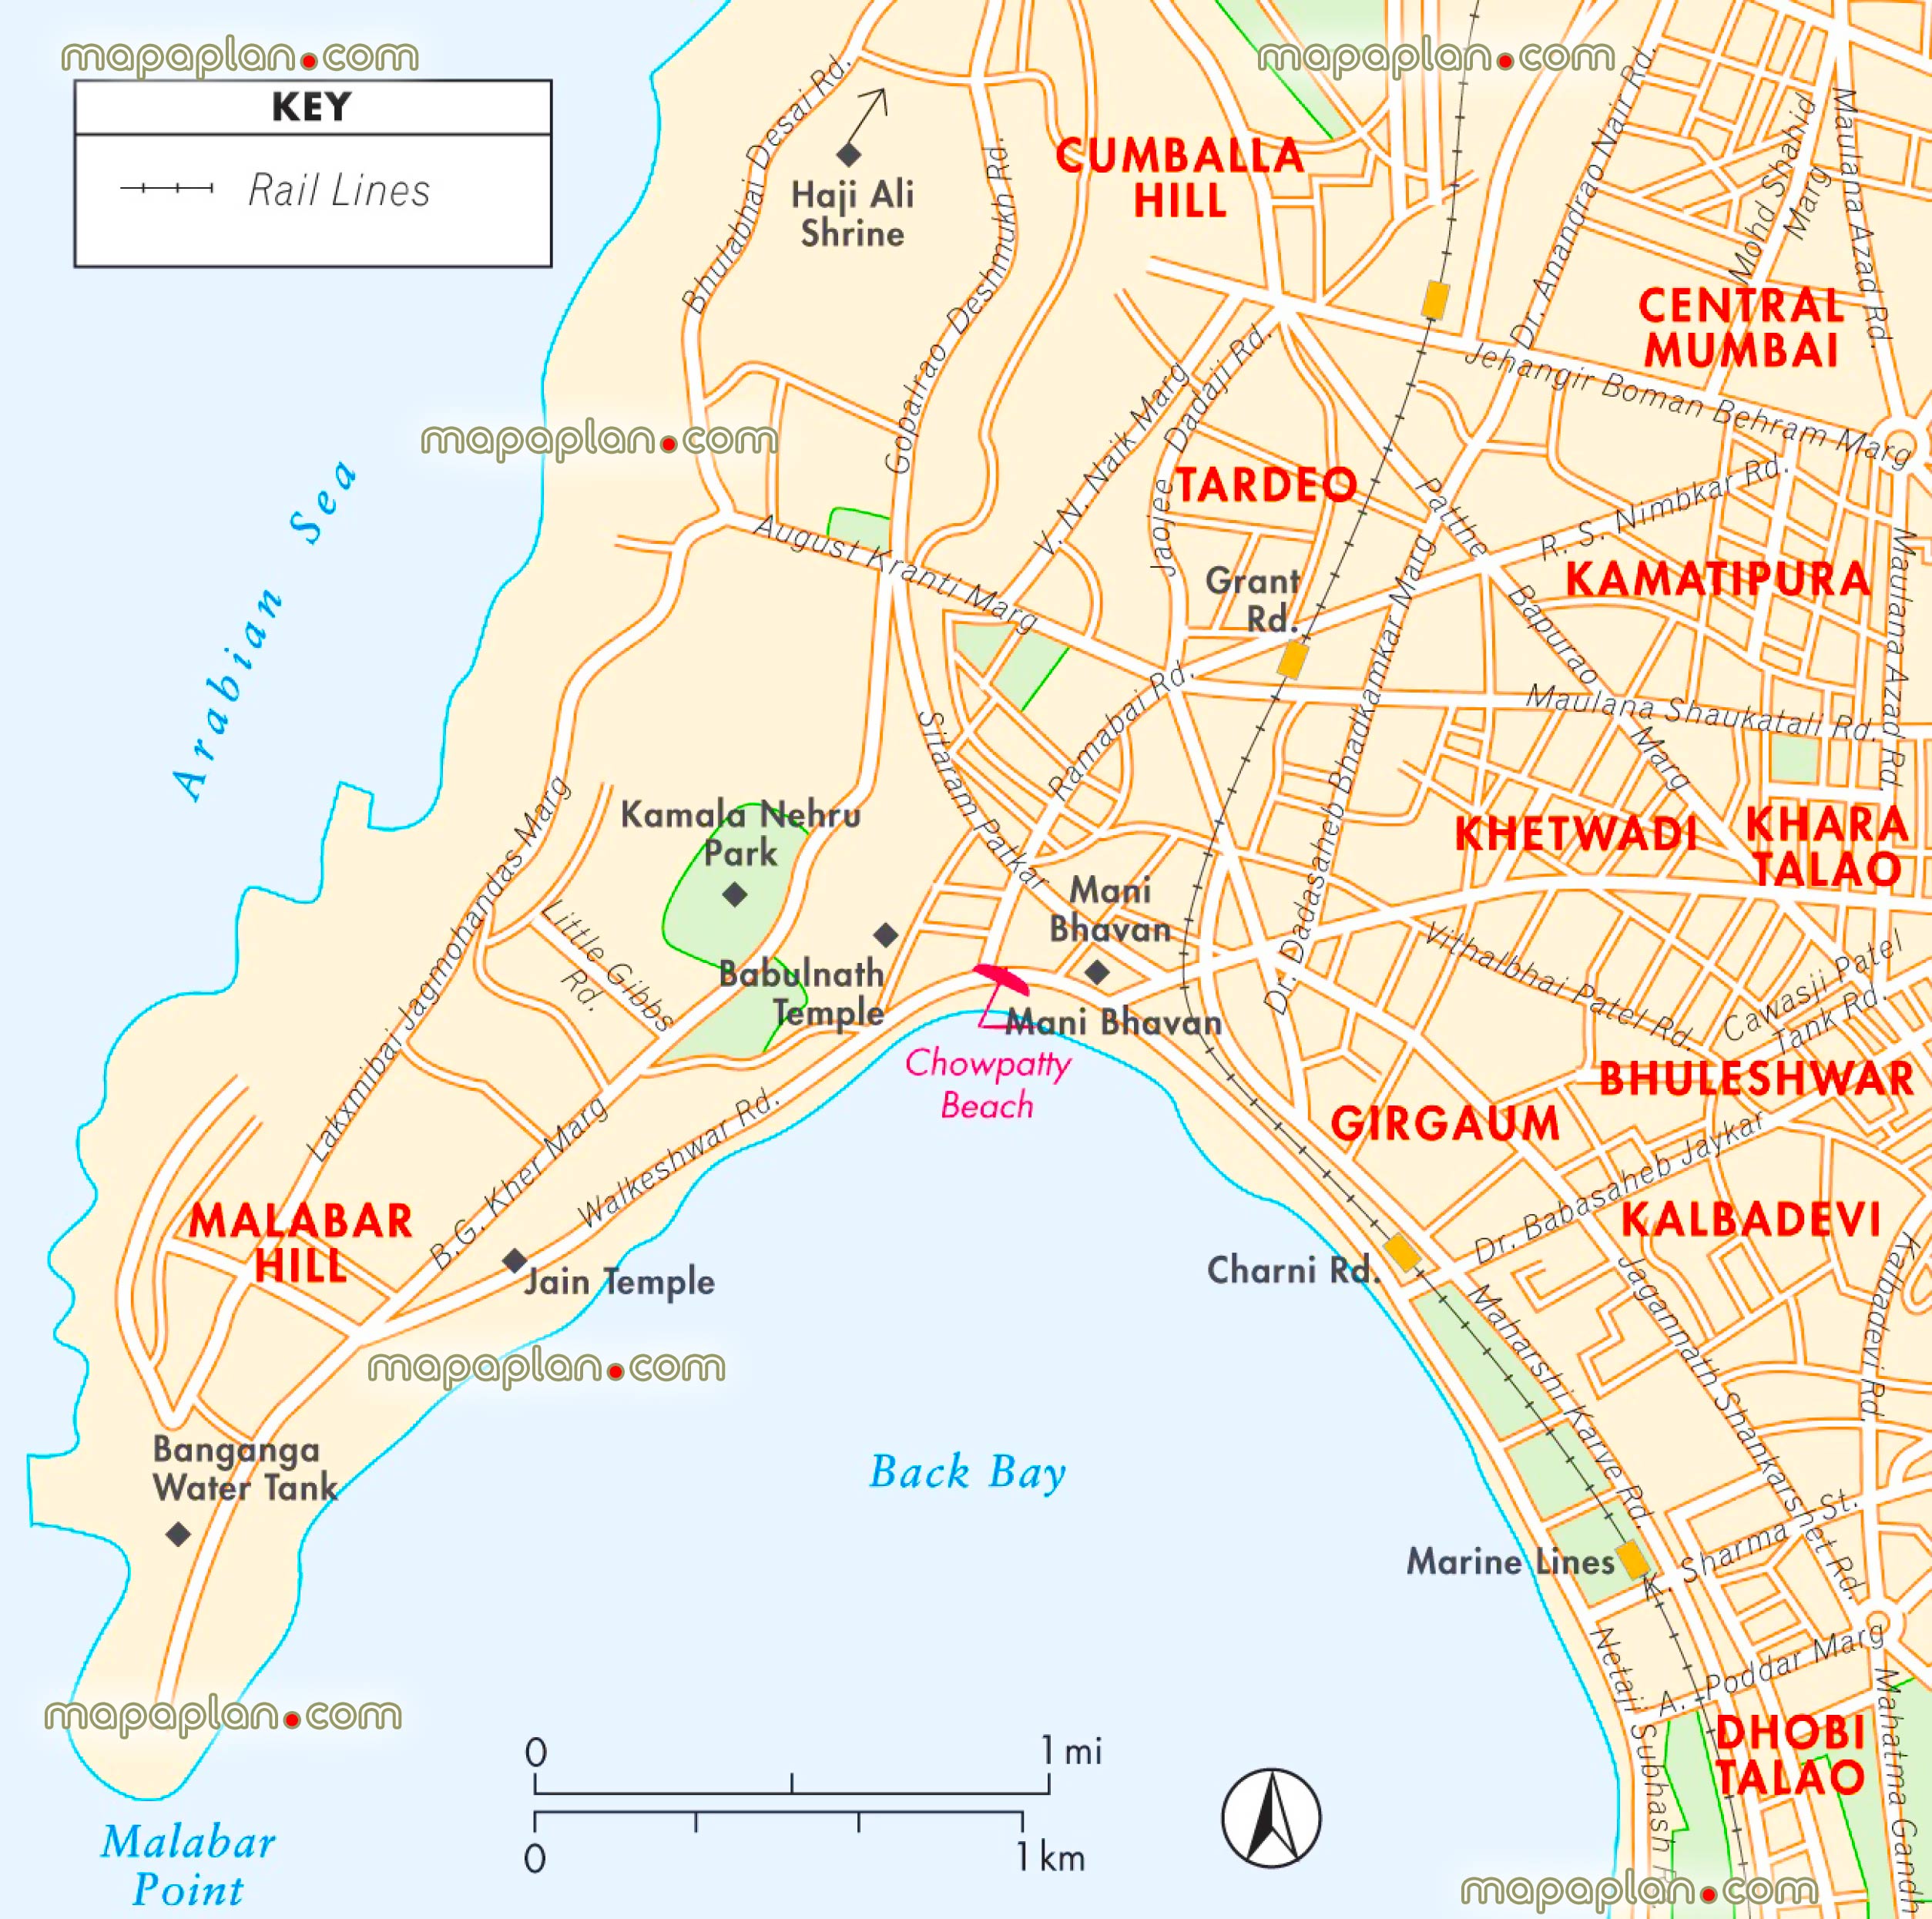 mumbai malabar hill detailed map central free download offline city street top attractions places detailed itinerary popout interactive guide english historical streets beaches parks what see where go directions interesting things do railway train stations rail routes local roadss Mumbai Top tourist attractions map